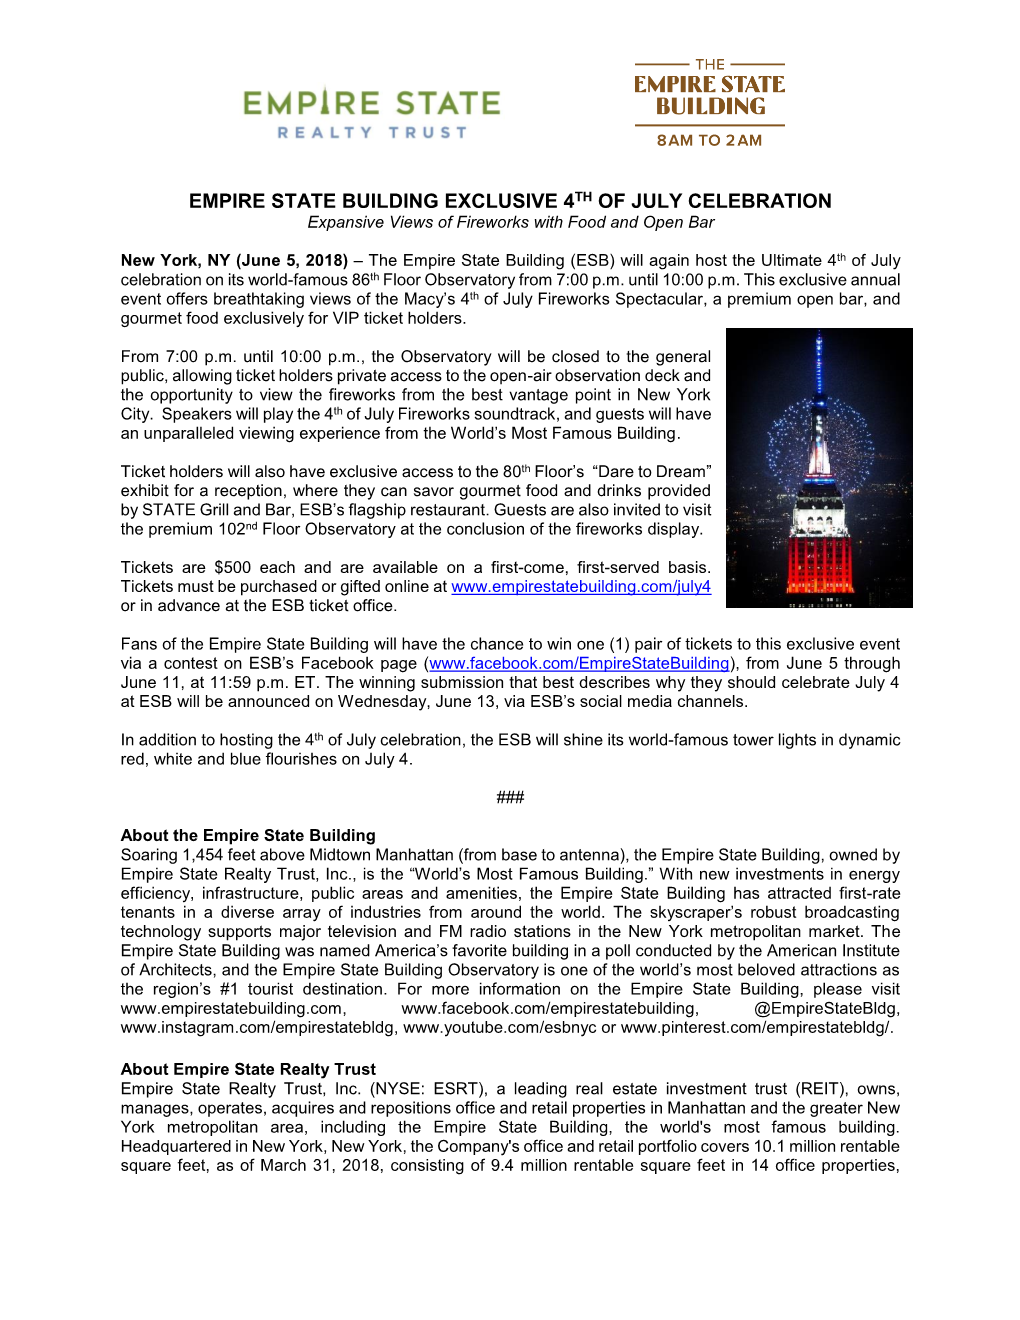 EMPIRE STATE BUILDING EXCLUSIVE 4TH of JULY CELEBRATION Expansive Views of Fireworks with Food and Open Bar